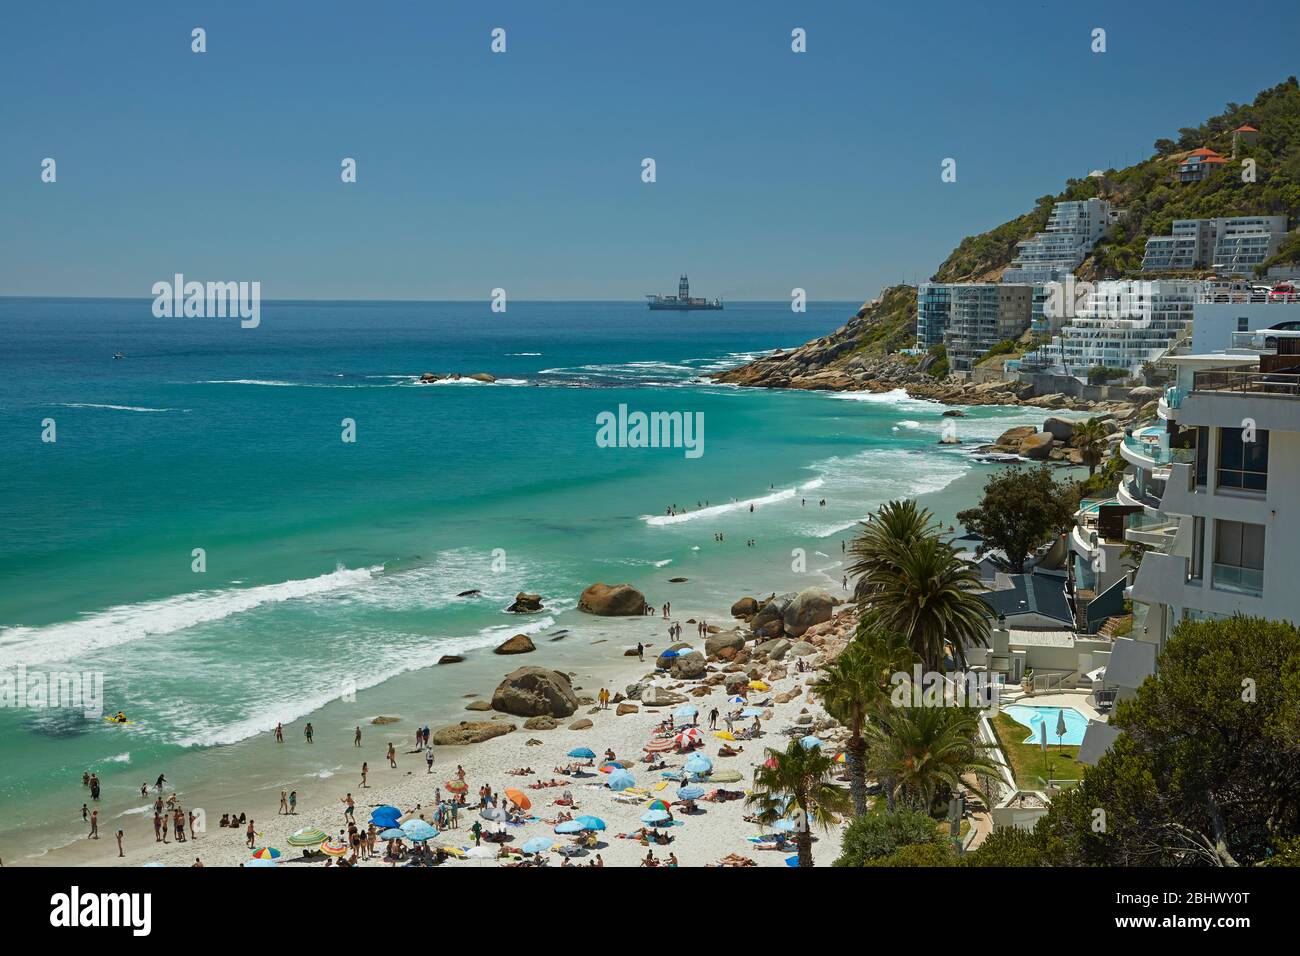 Apartments and beach at Clifton, Cape Town, South Africa Stock Photo